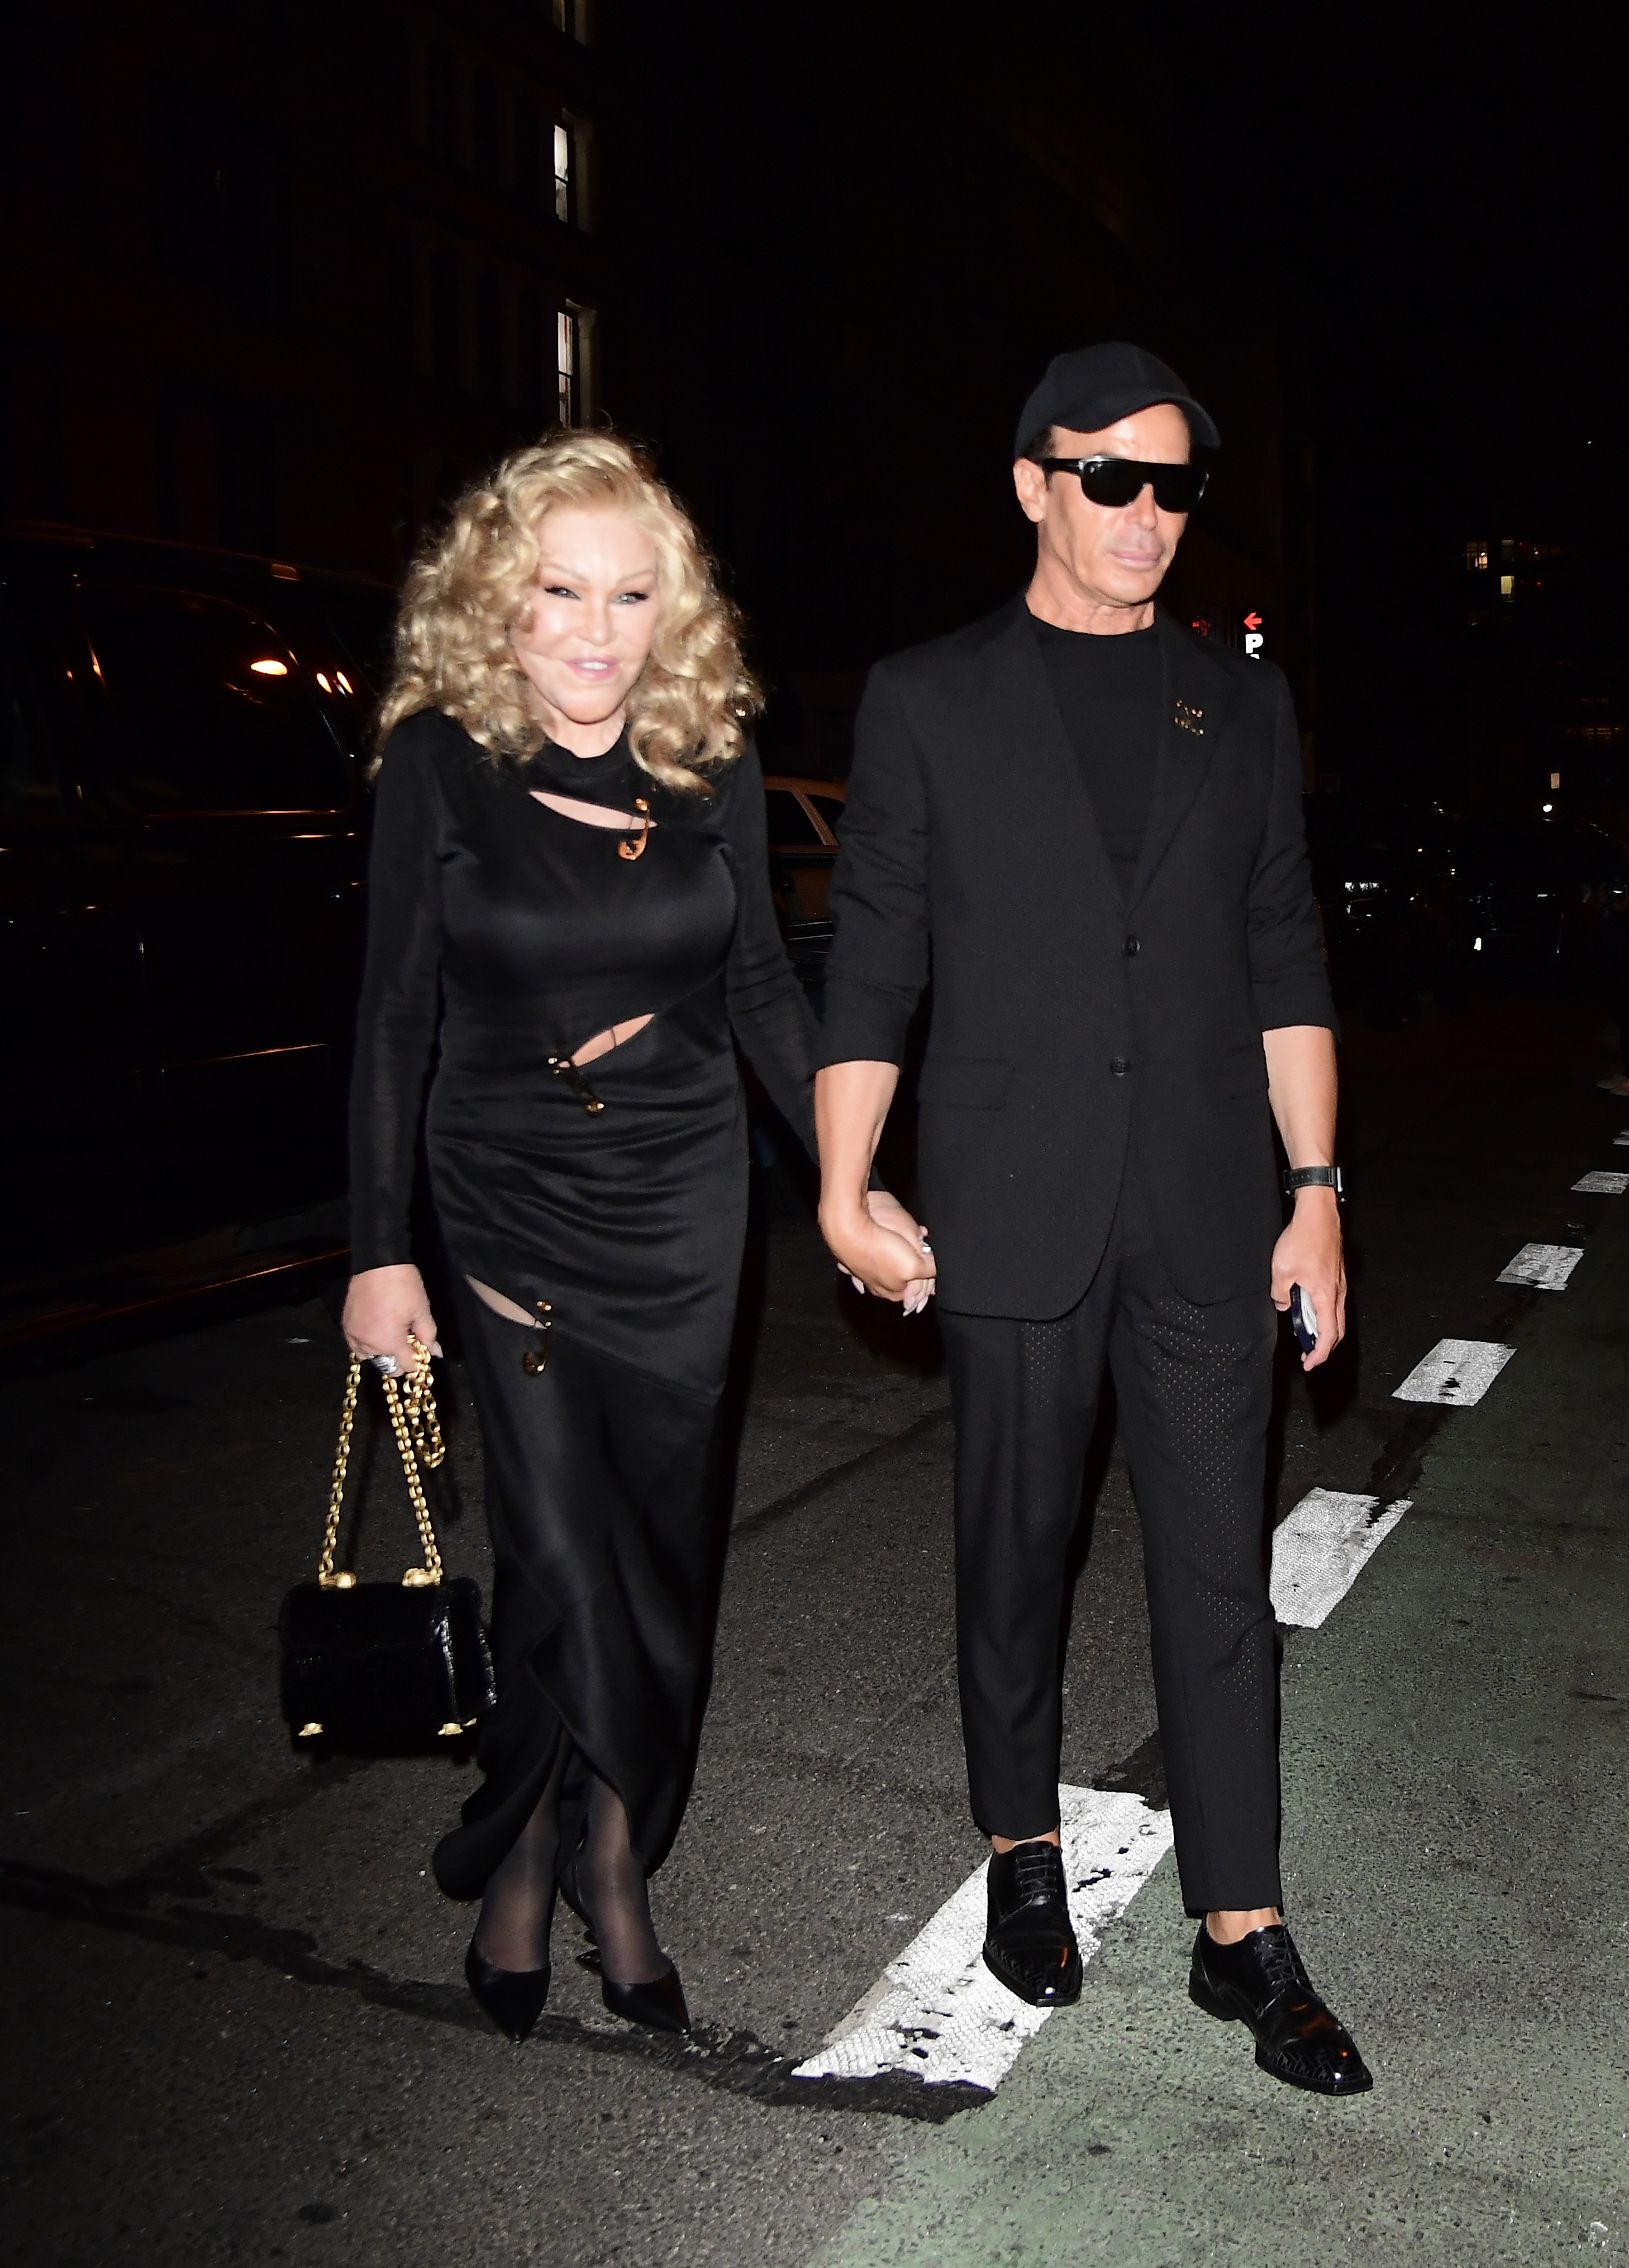 Lloyd Klein and Jocelyn Wildenstein attend the FENDI 25th Anniversary of the Baguette at Hammerstein Ballroom in New York City, on September 9, 2022. | Source: Getty Images